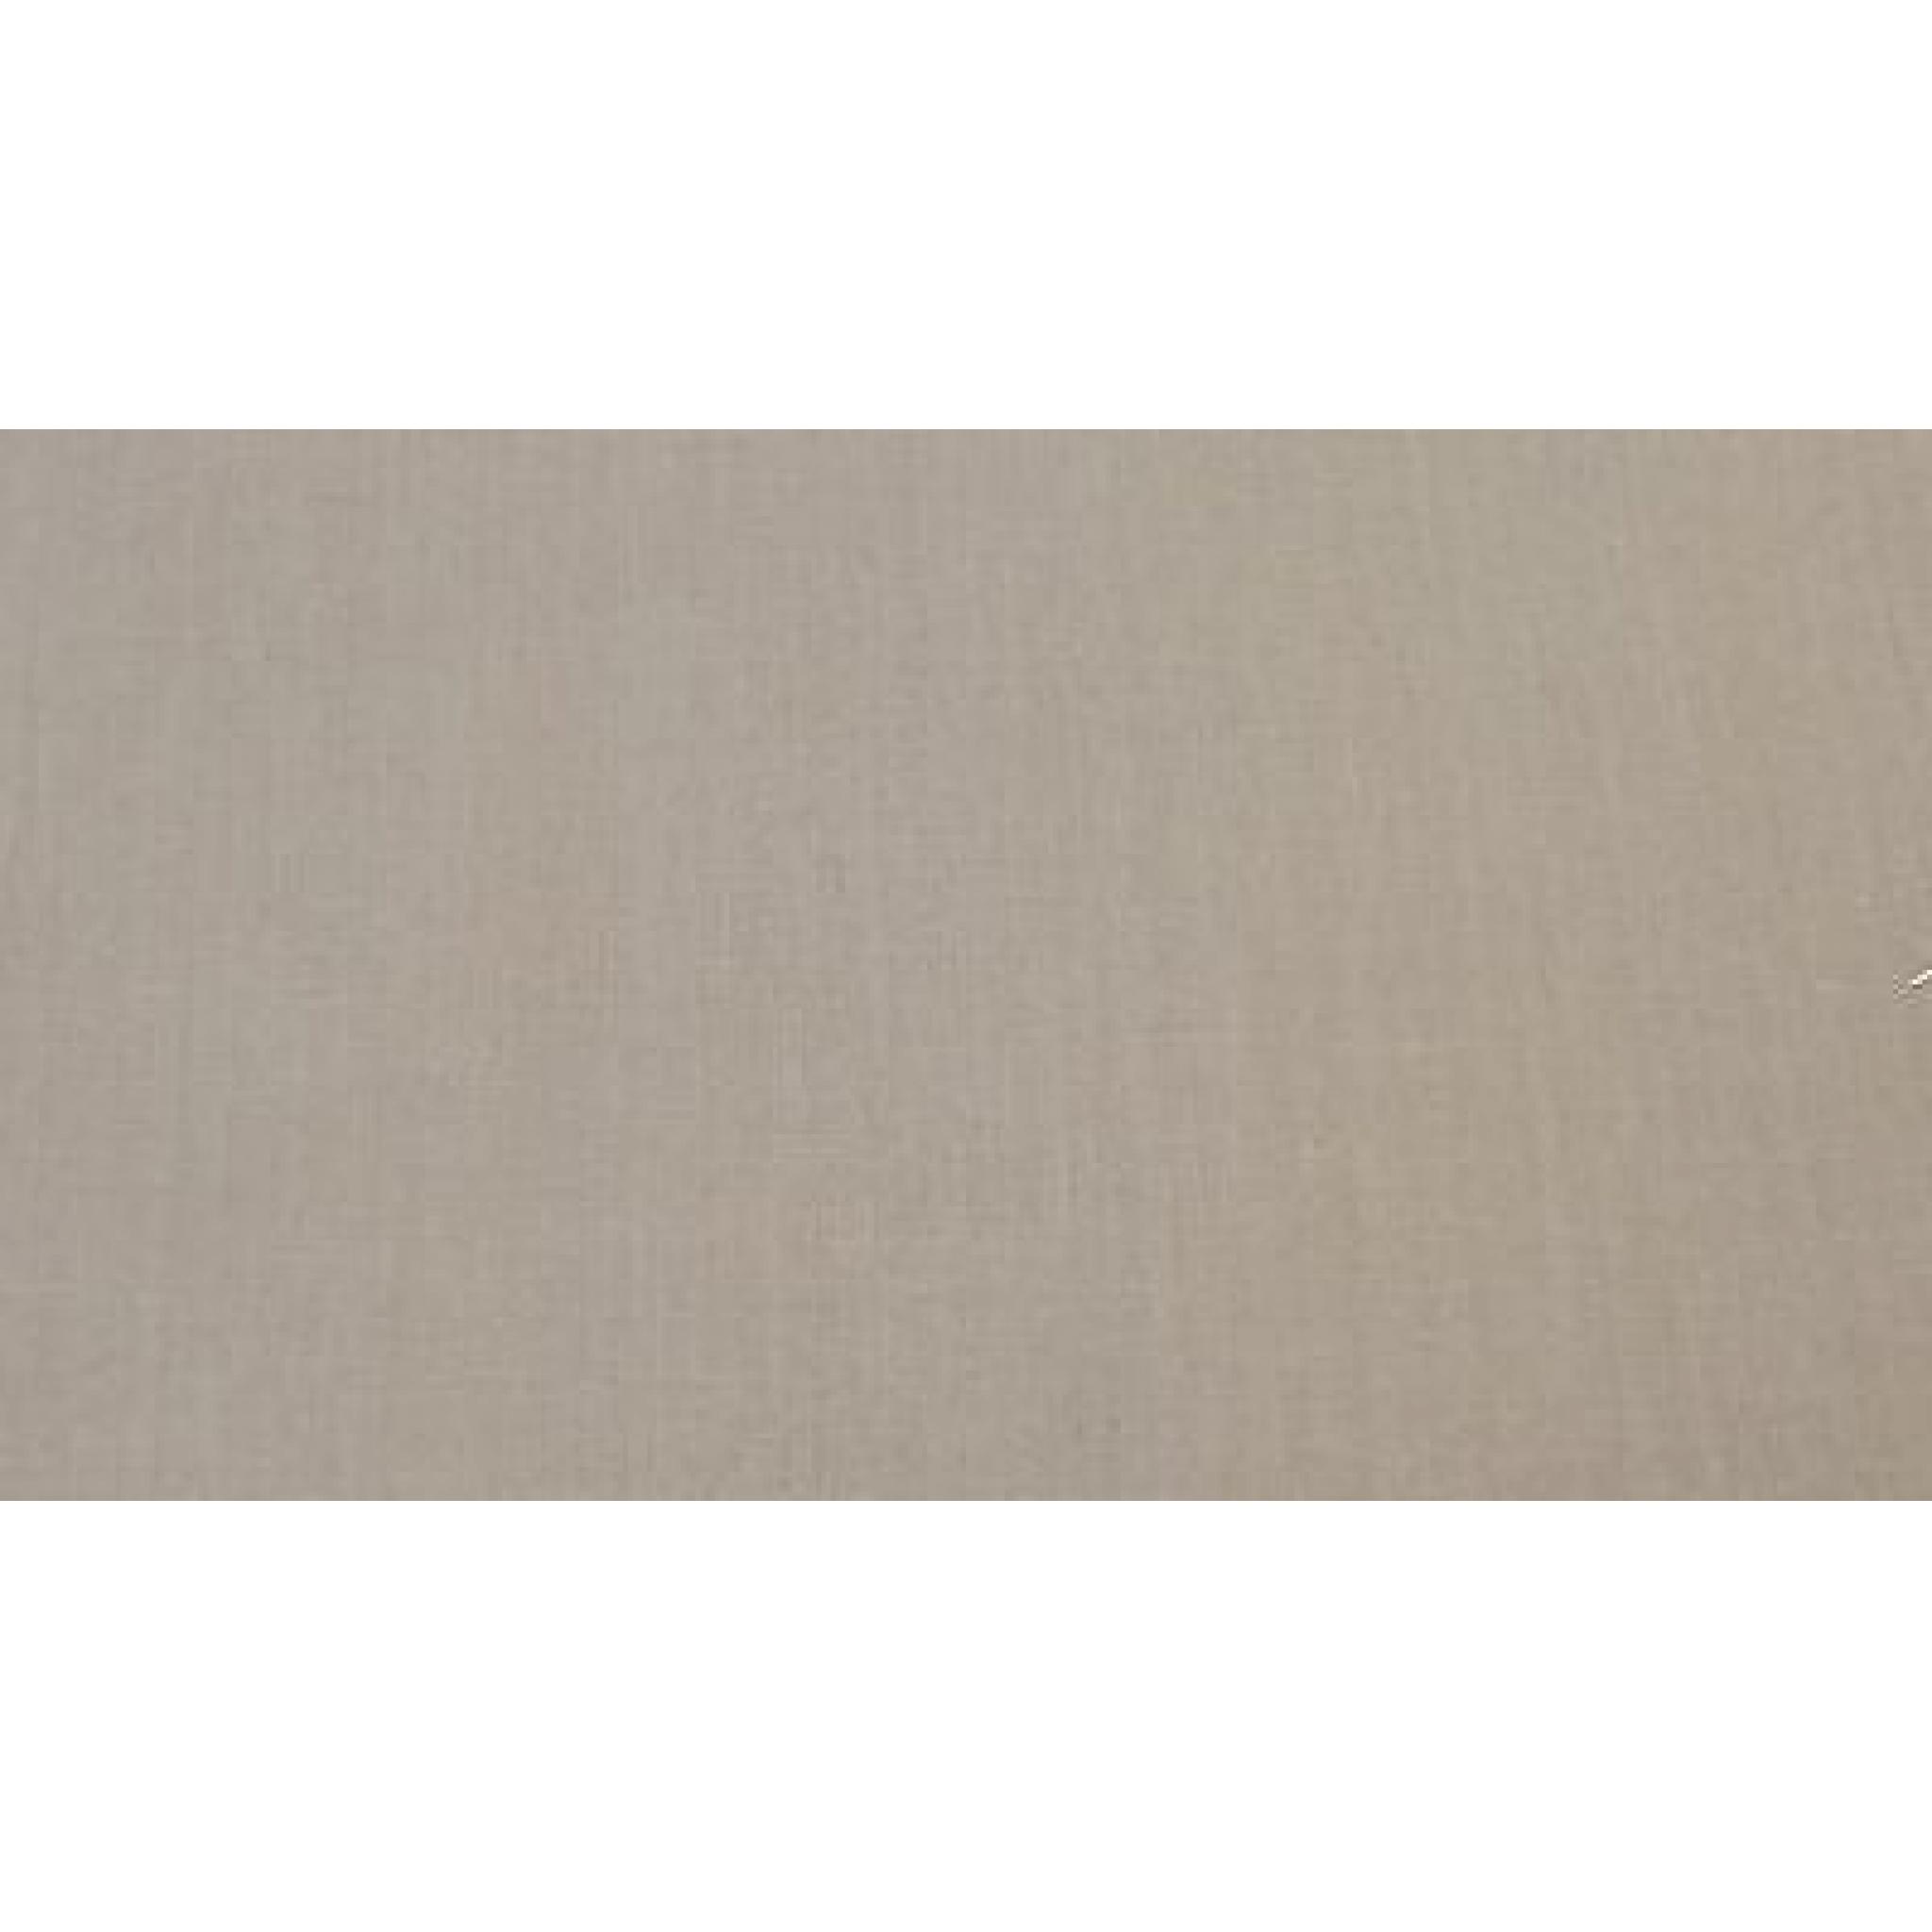 Superking fitted valance 12" mattress depth 16" box pleated valance 50/50 pc 